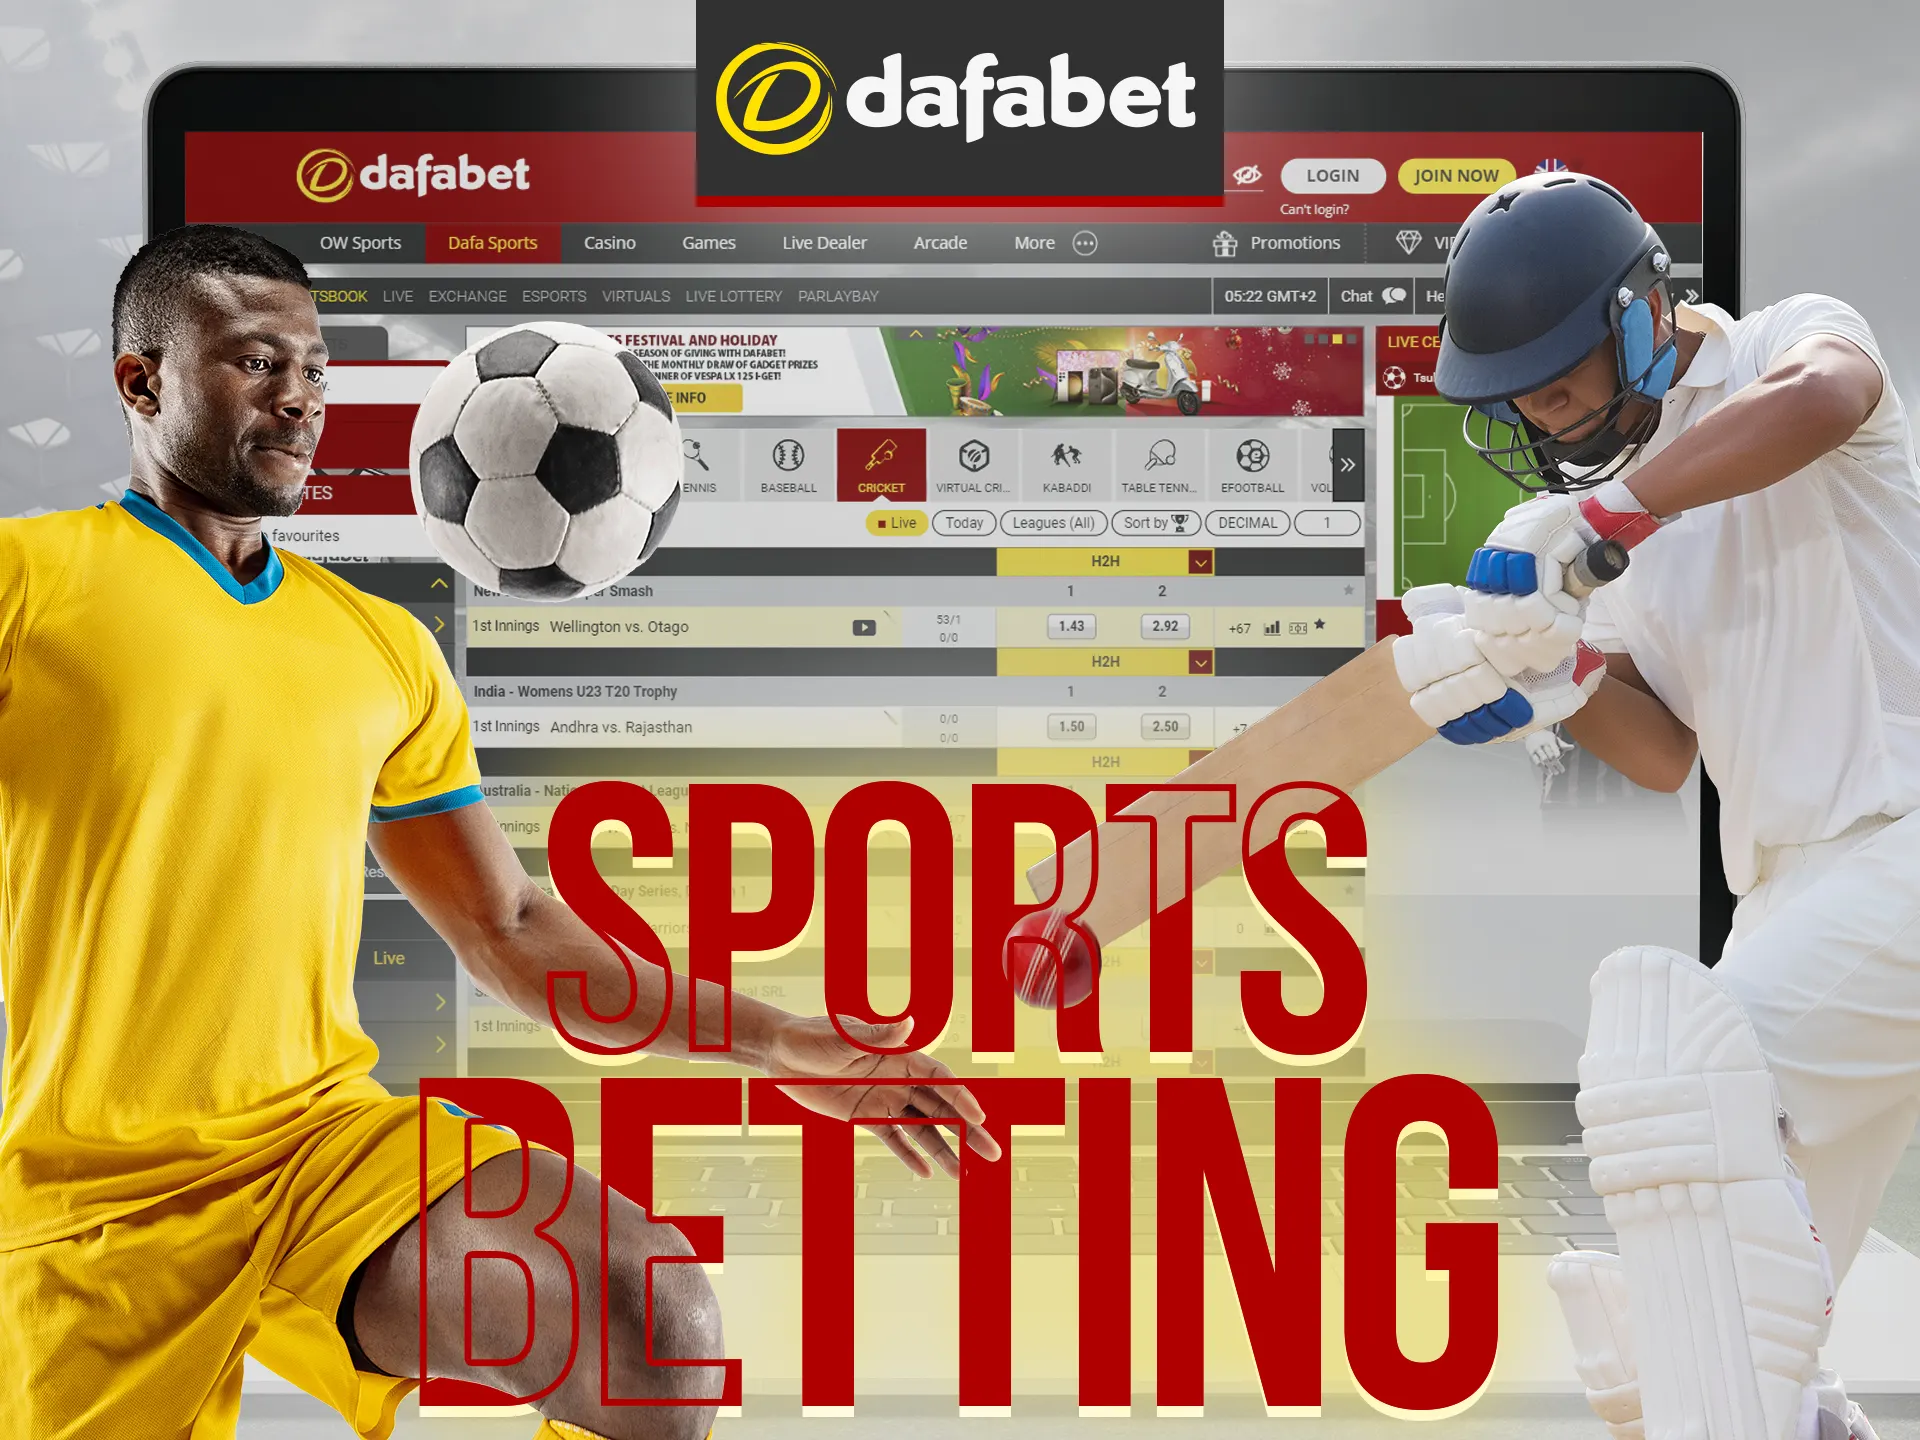 Bet on 30+ sports at Dafabet, including cricket, soccer, and live events with changing odds.